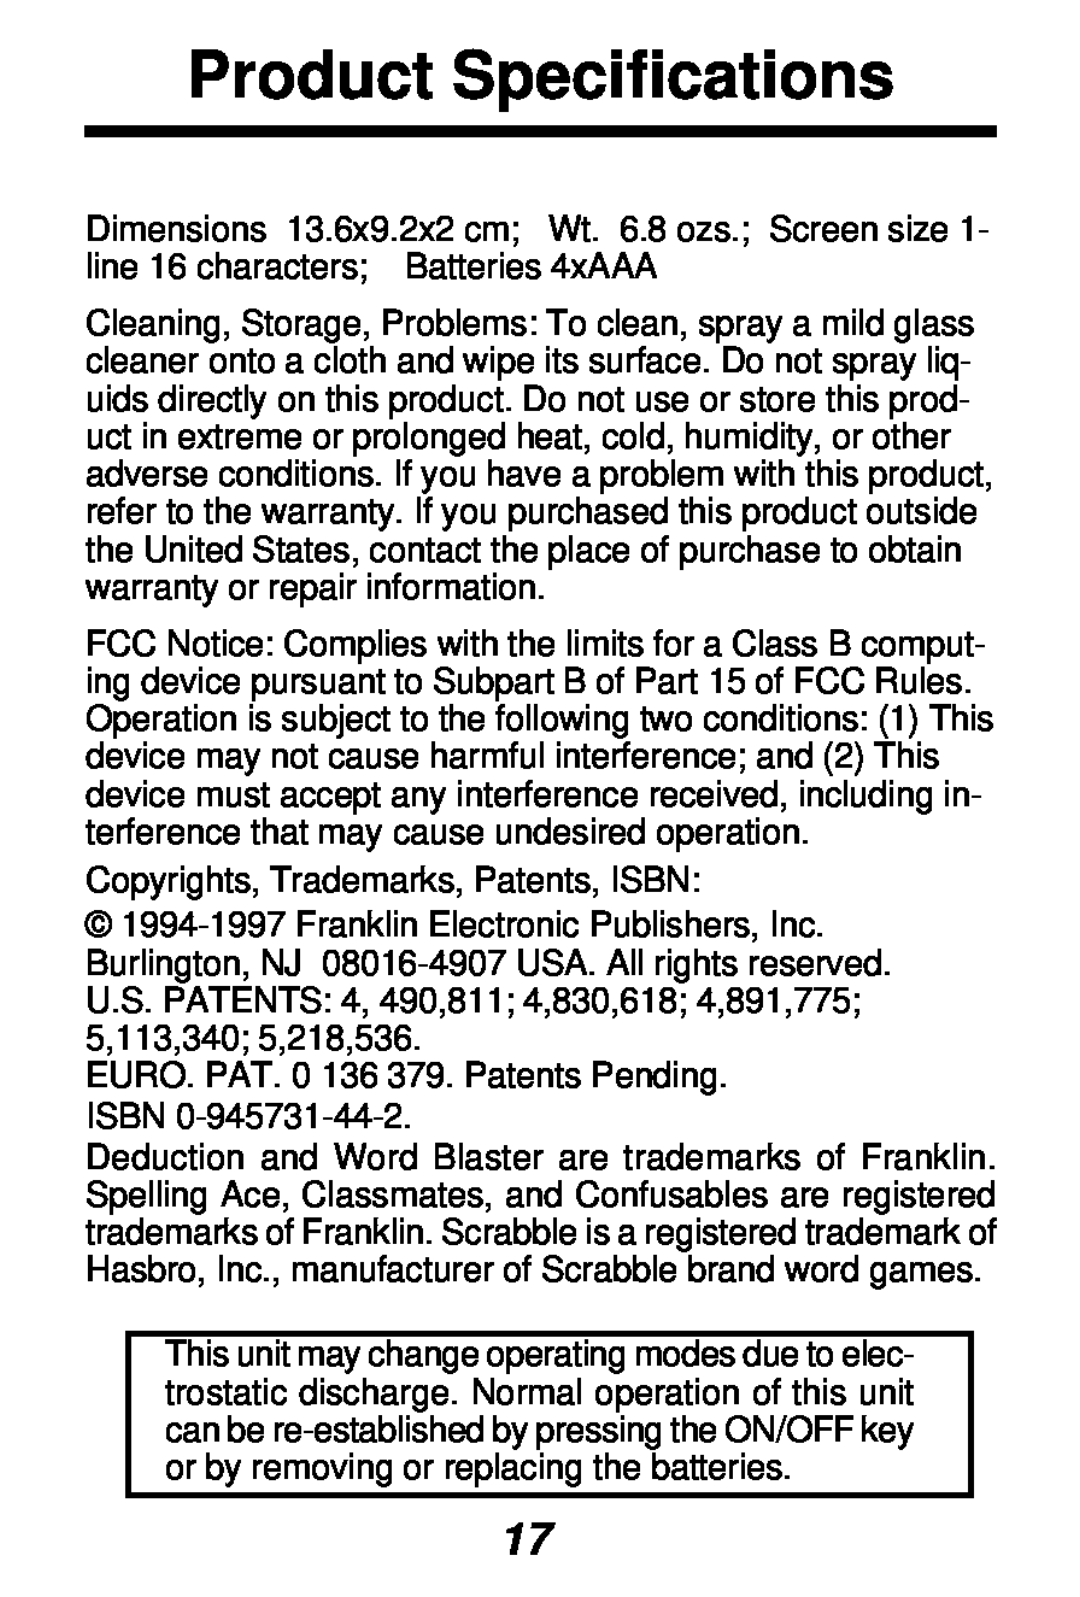 Franklin SA-98 manual Product Specifications 